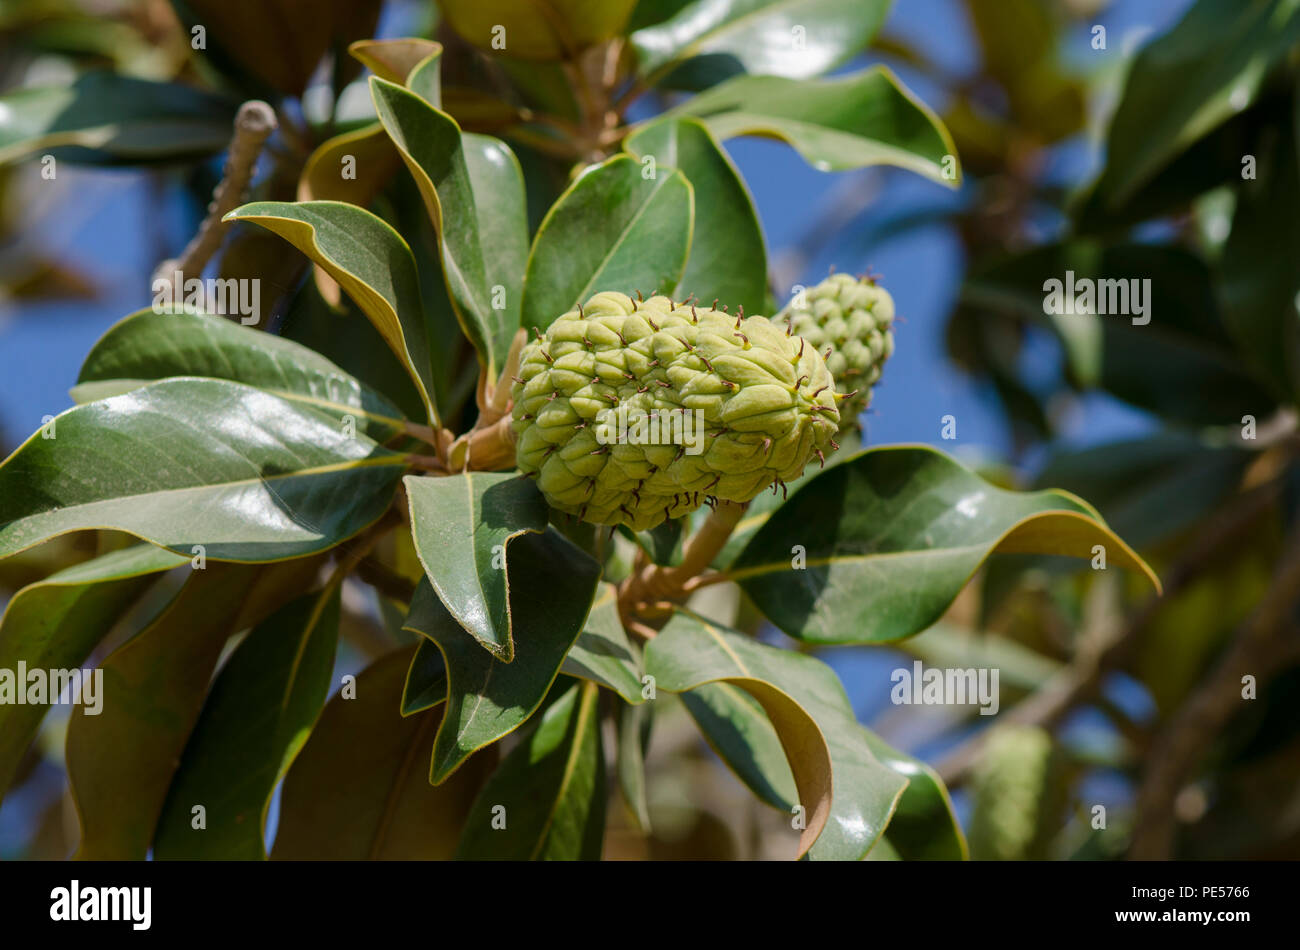 Fruit, seed pods of a Magnolia grandiflora tree, southern magnolia or bull bay,Andalusia, Spain. Stock Photo